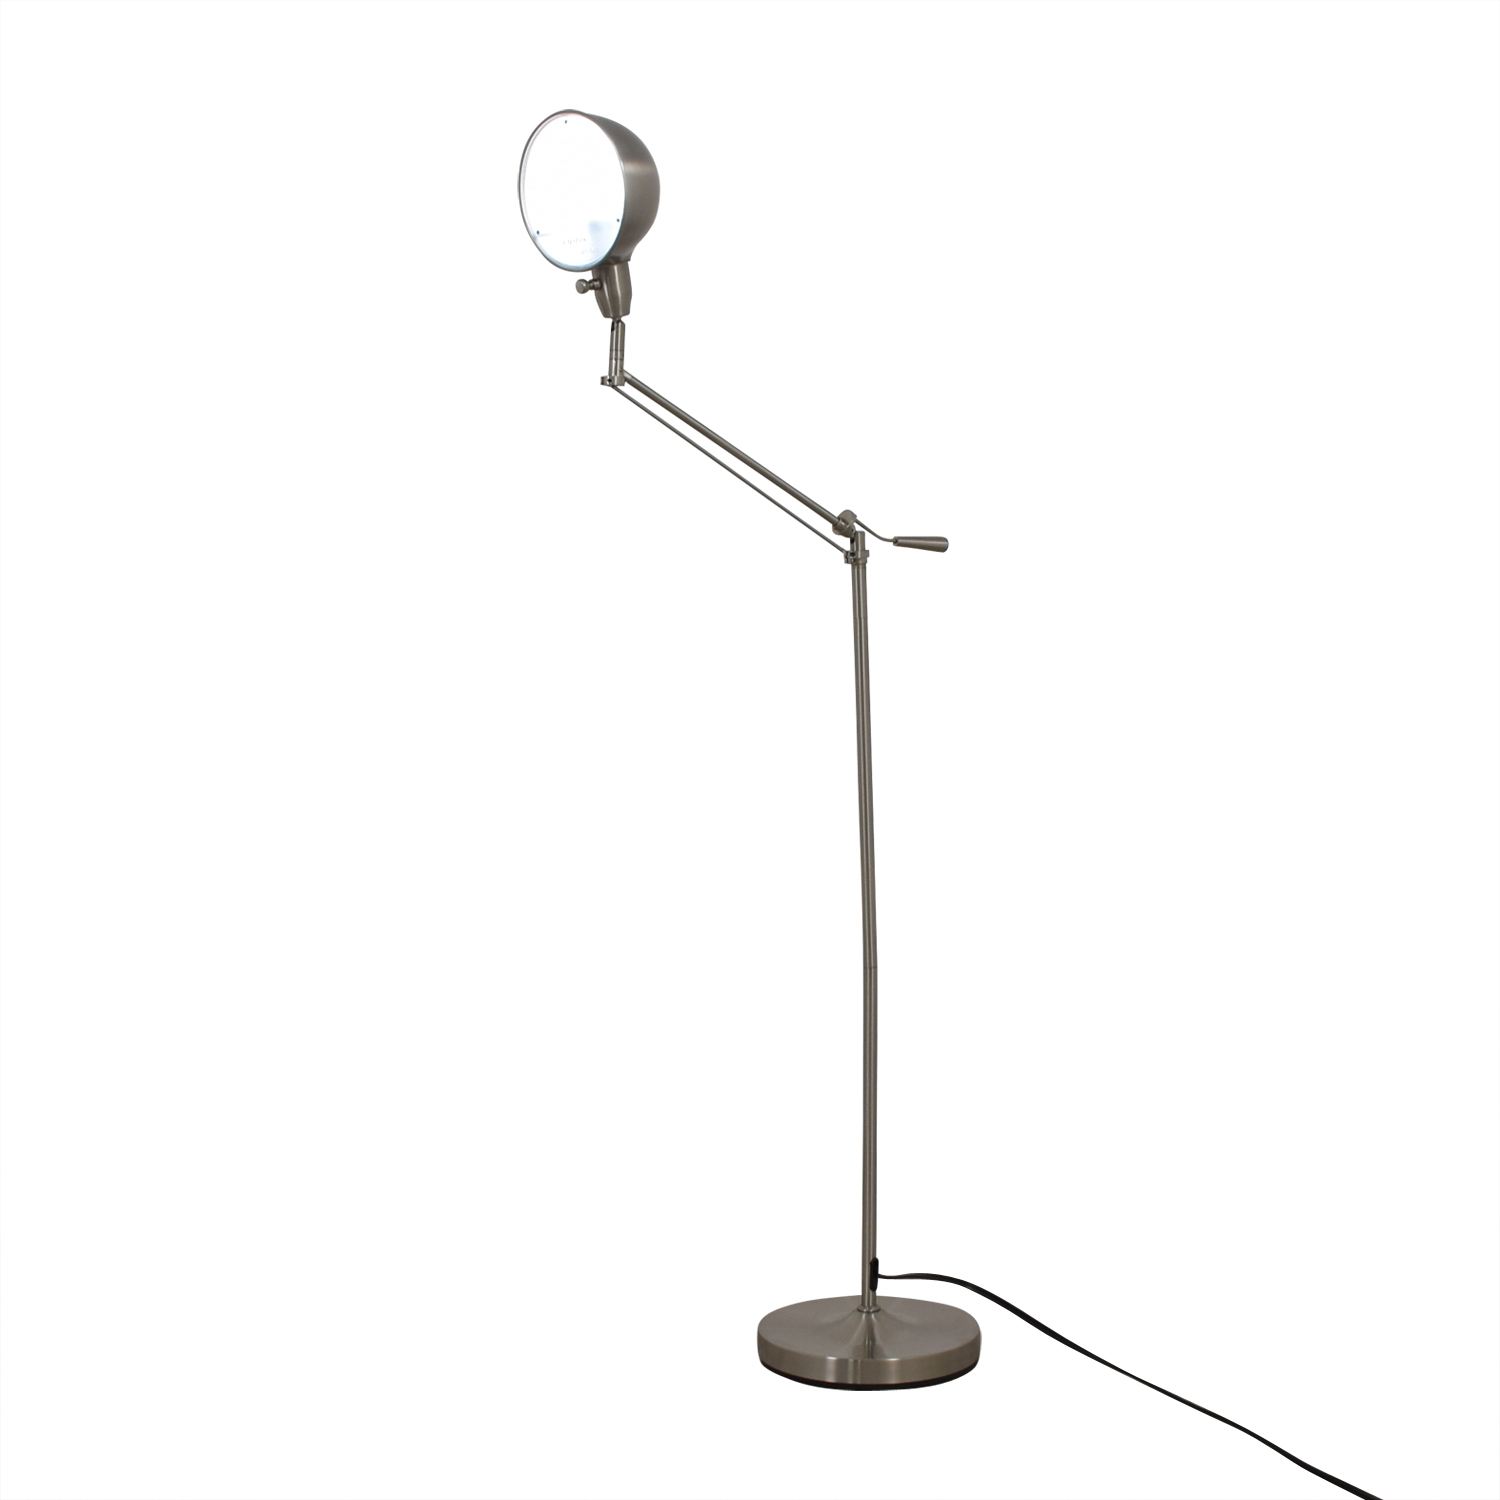 75 Off Verilux Brookfield Natural Spectrum Floor Lamp Decor within dimensions 1500 X 1500